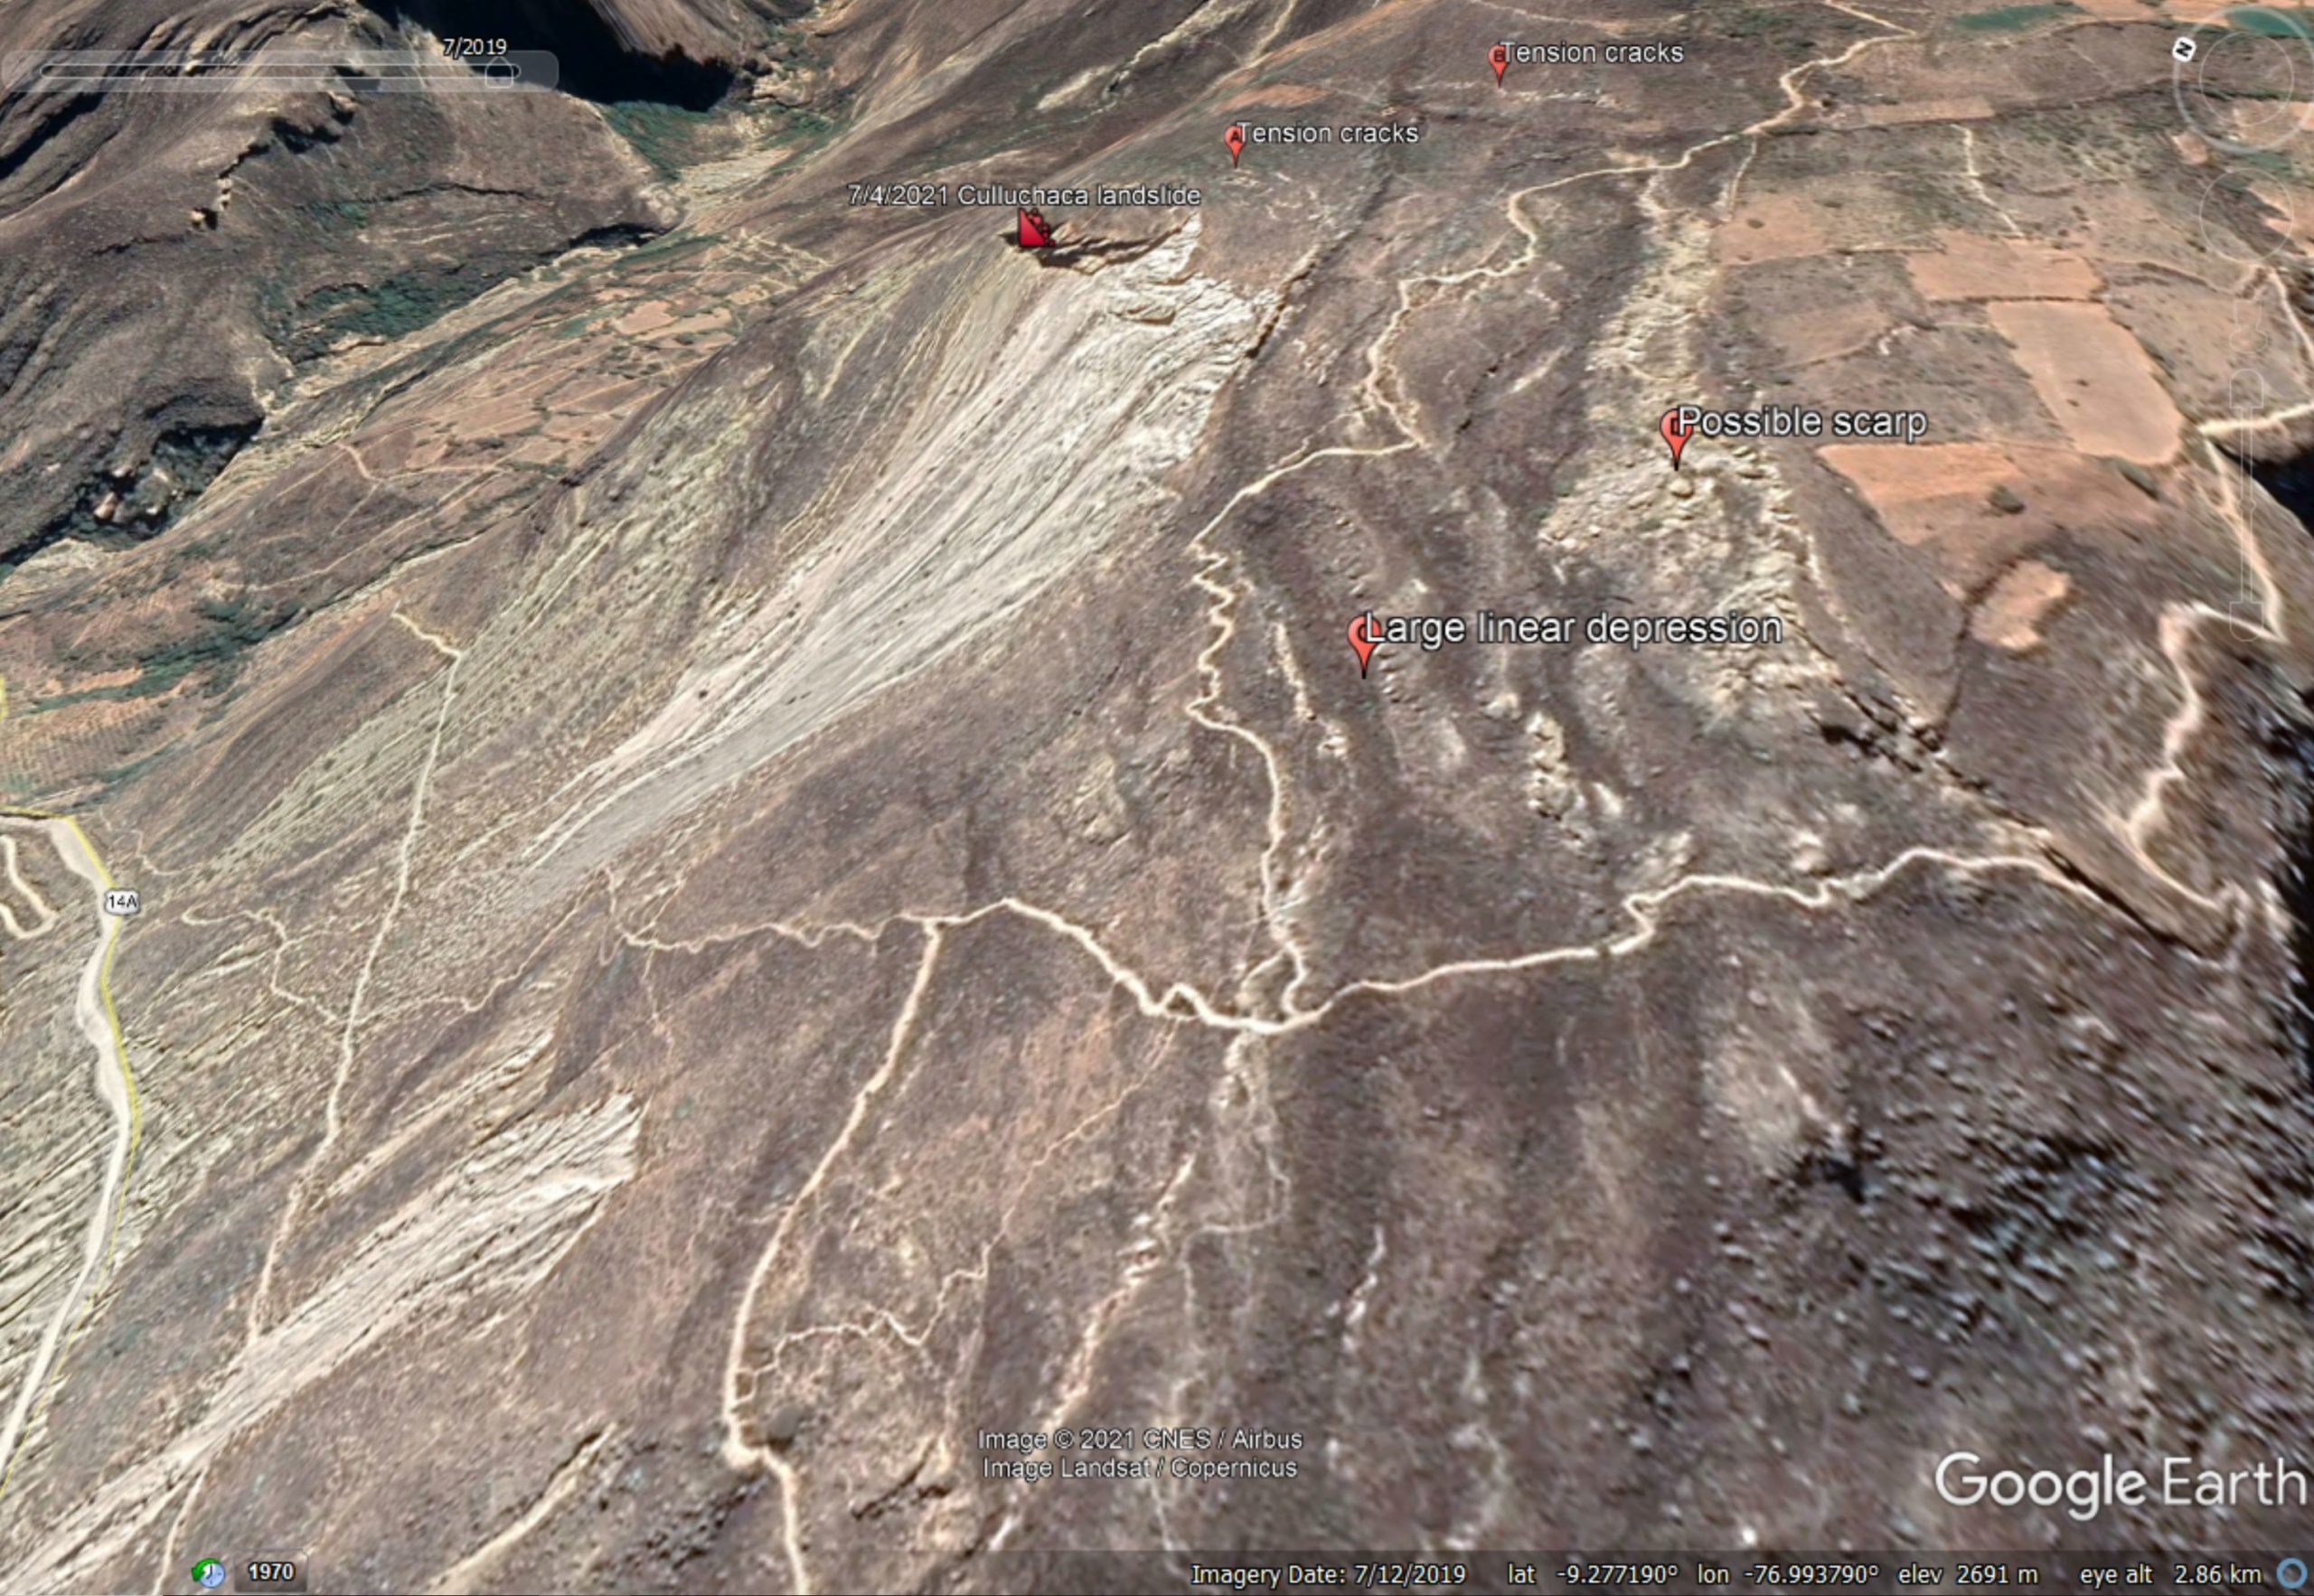 Google Earth view of features at the crest of the landslide close to Culluchaca in Peru. 